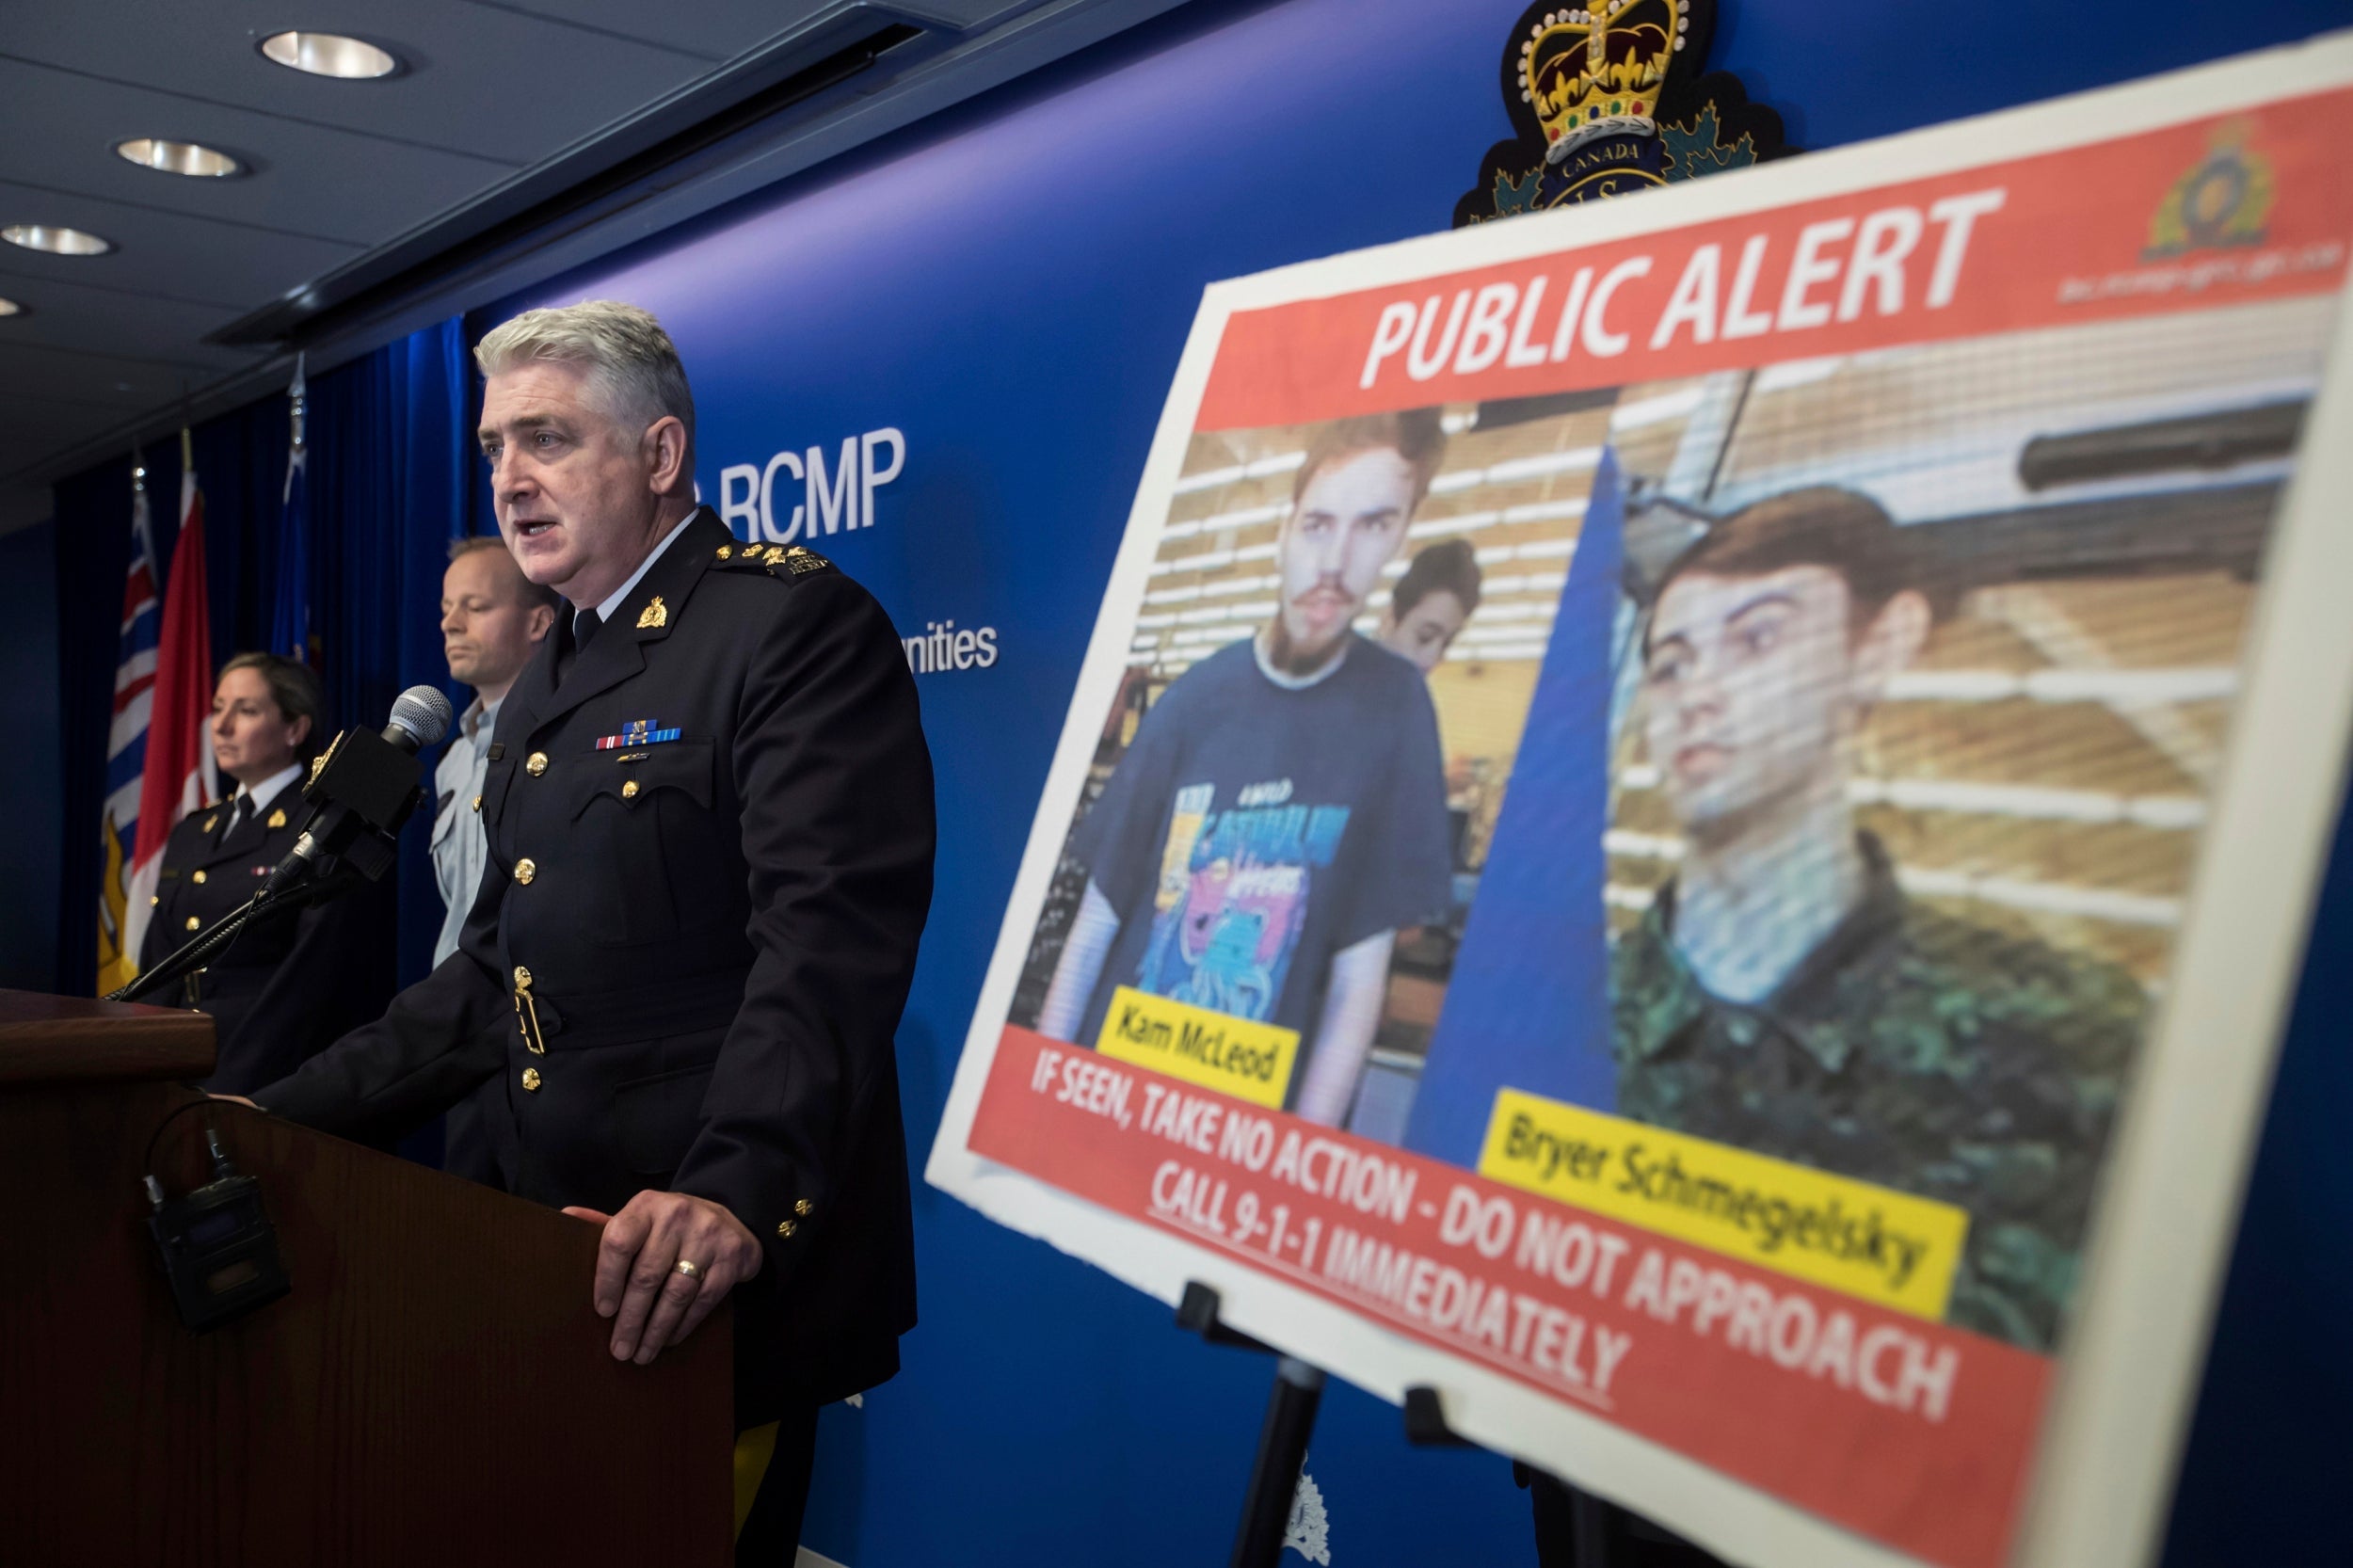 Security camera images recorded in Saskatchewan are displayed as RCMP assistant commissioner Kevin Hackett speaks at news conference in Surrey, British Columbia